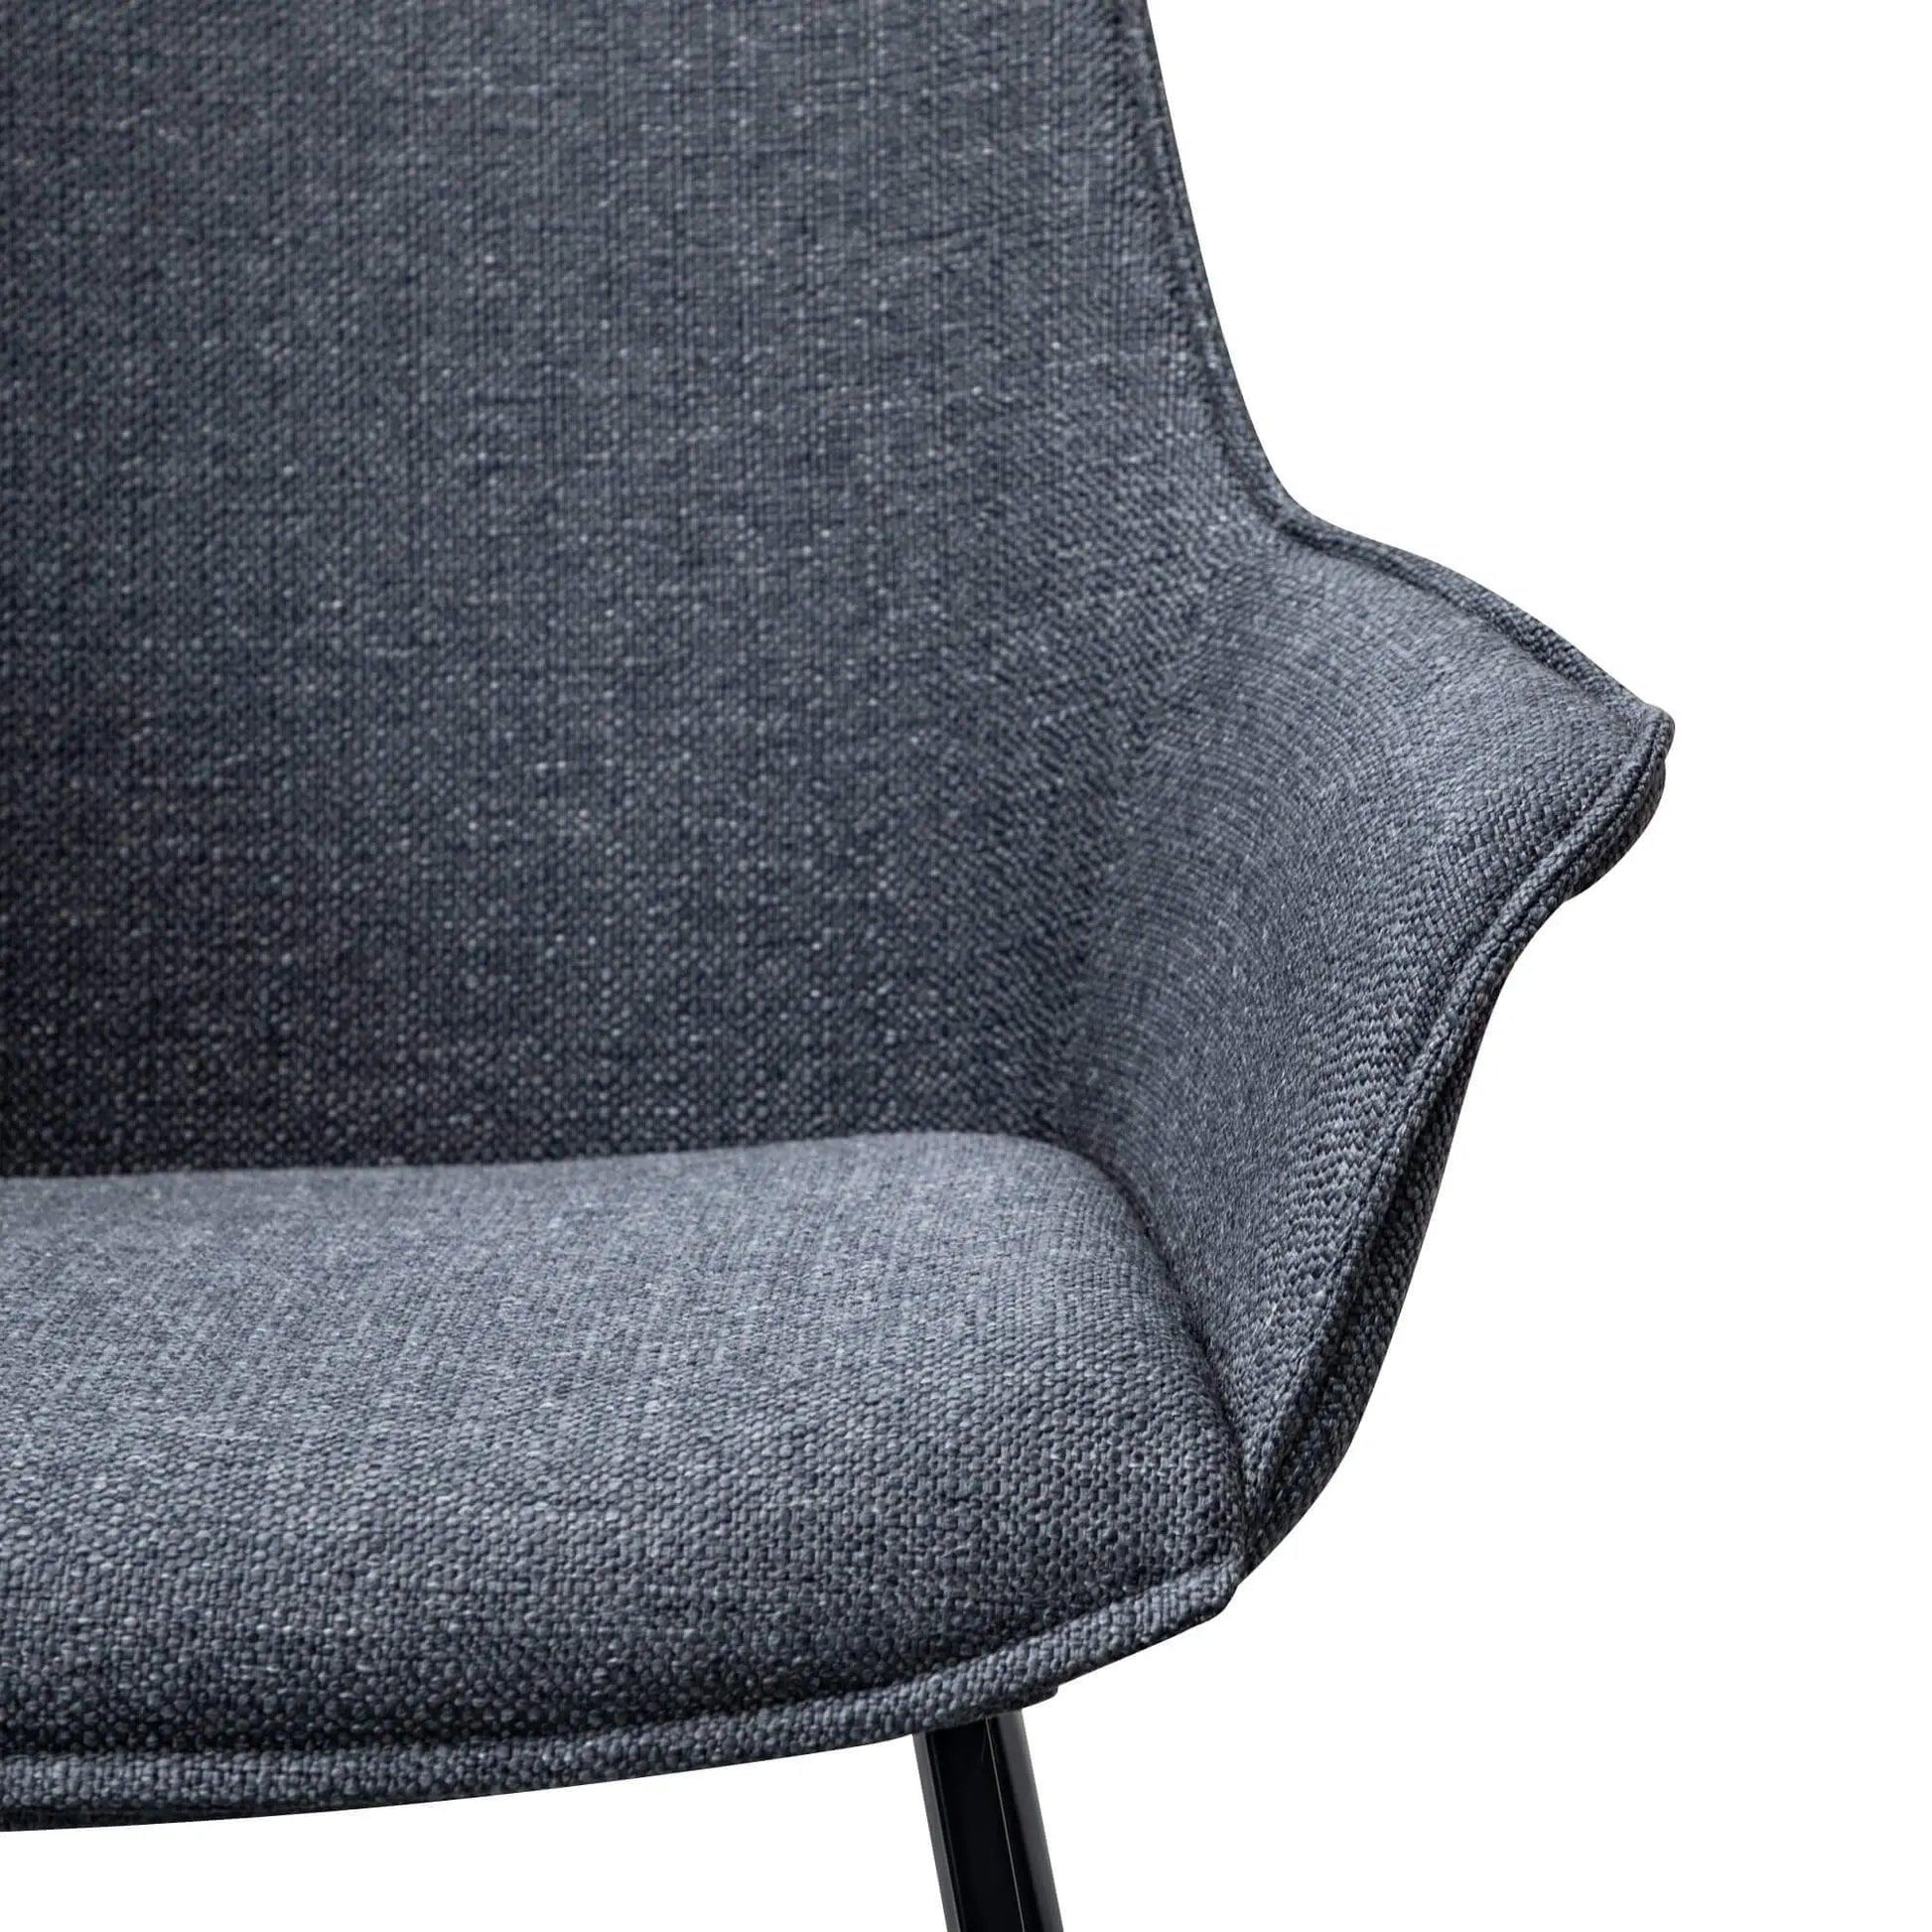 Calibre Dining Chair - Charcoal Grey (Set of 2) DC2633-SEx2 - Dining ChairsDC2633-SEx2 5